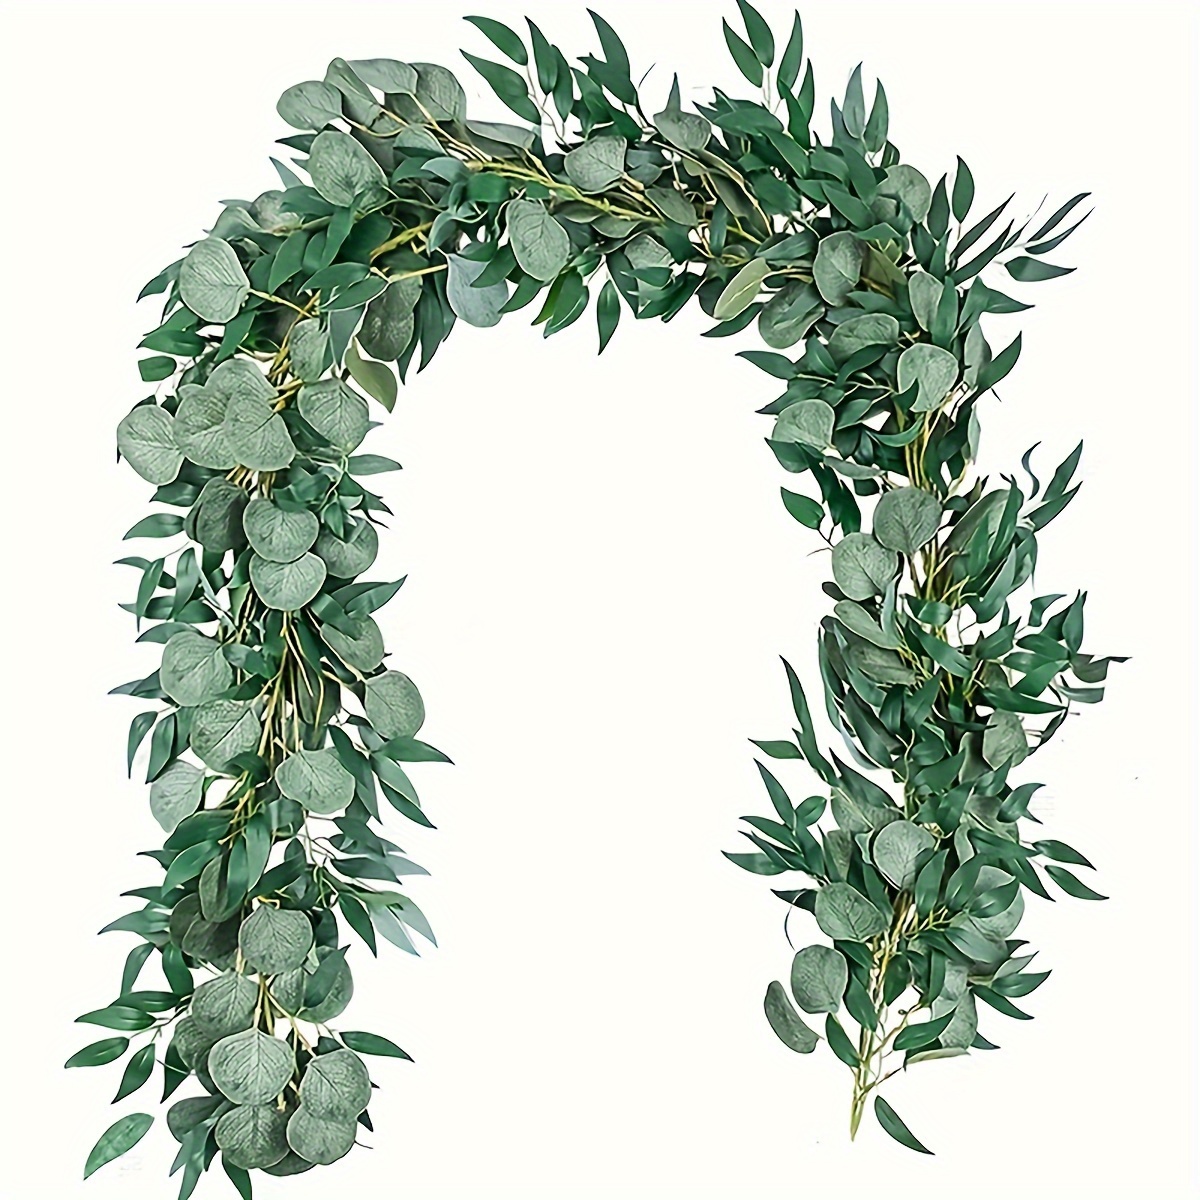 

2 Packs, Artificial Eucalyptus Garland Plant, Faux Hanging Eucalyptus Vines Leaves Greenery For Wedding Garden Party Bedroom Backdrop Arch Wall Decor